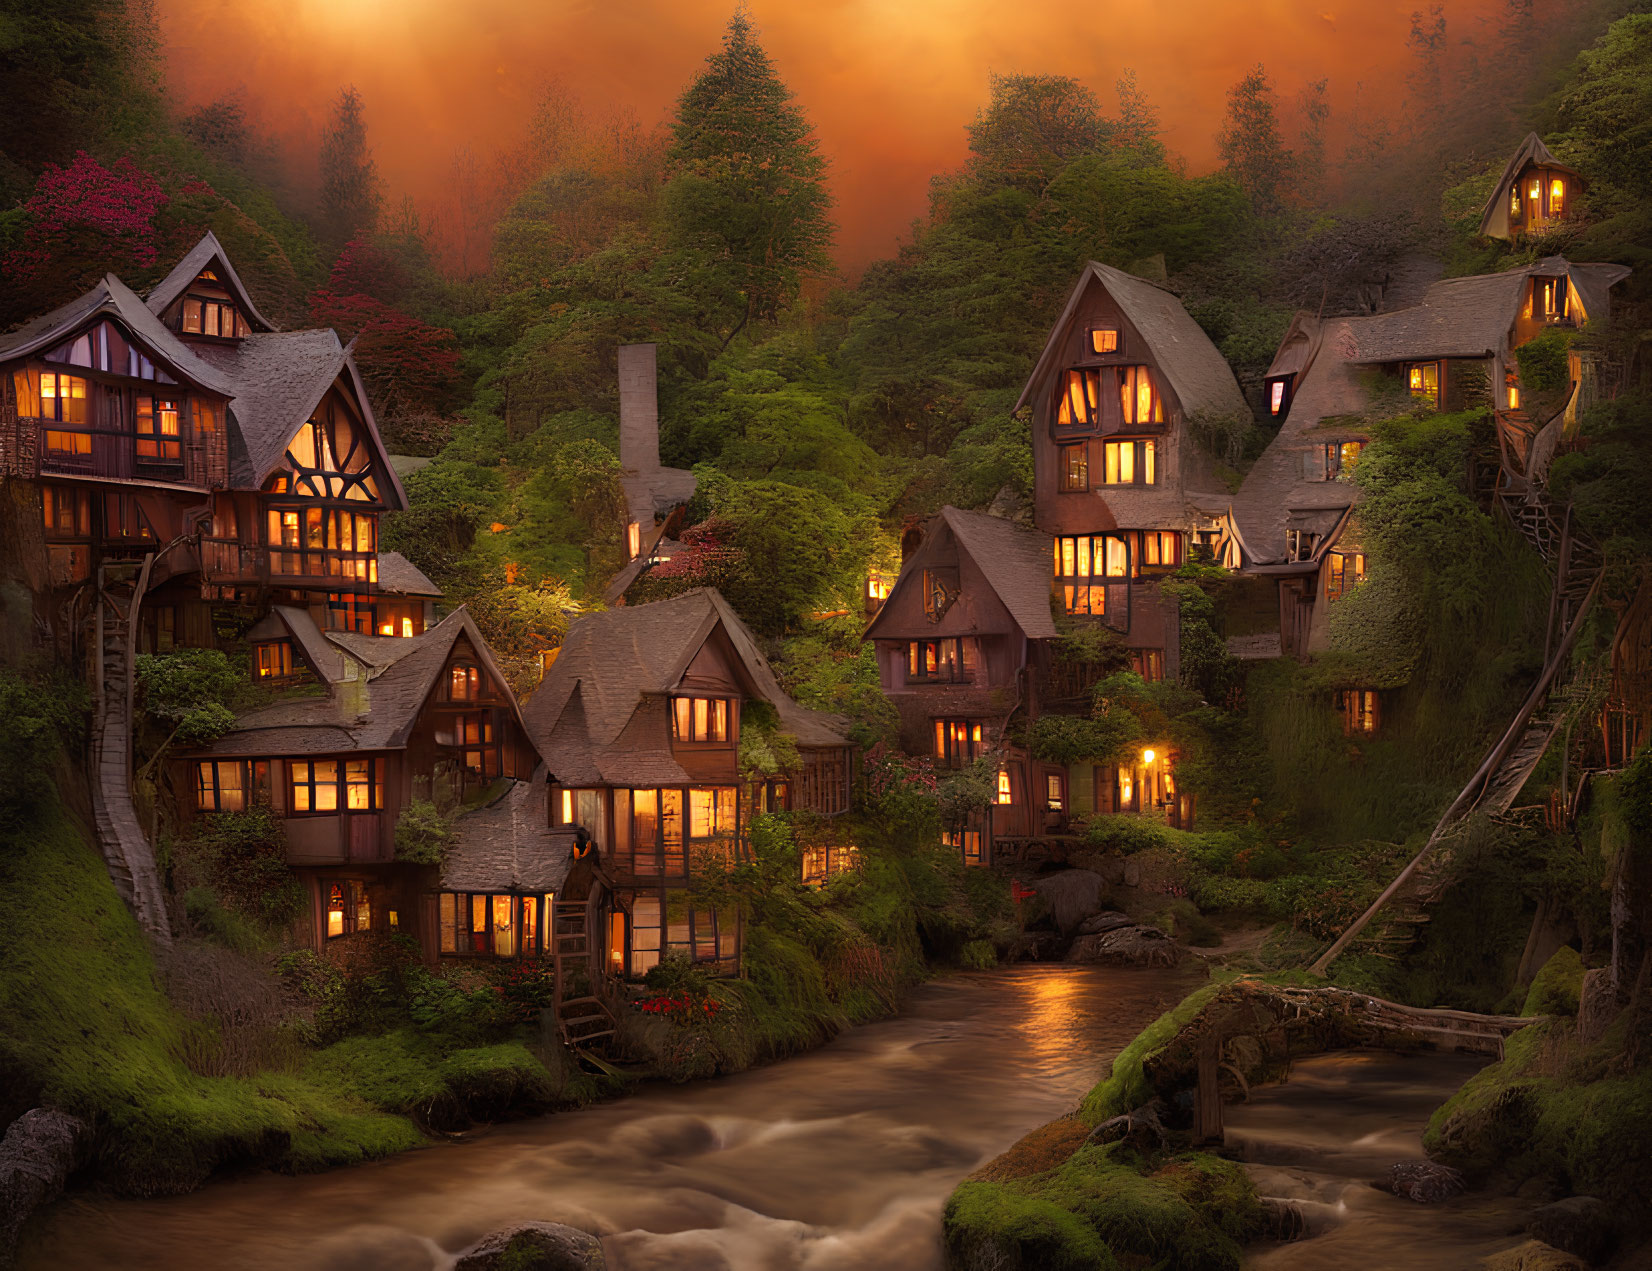 Enchanting village scene with cozy cottages by river at sunset